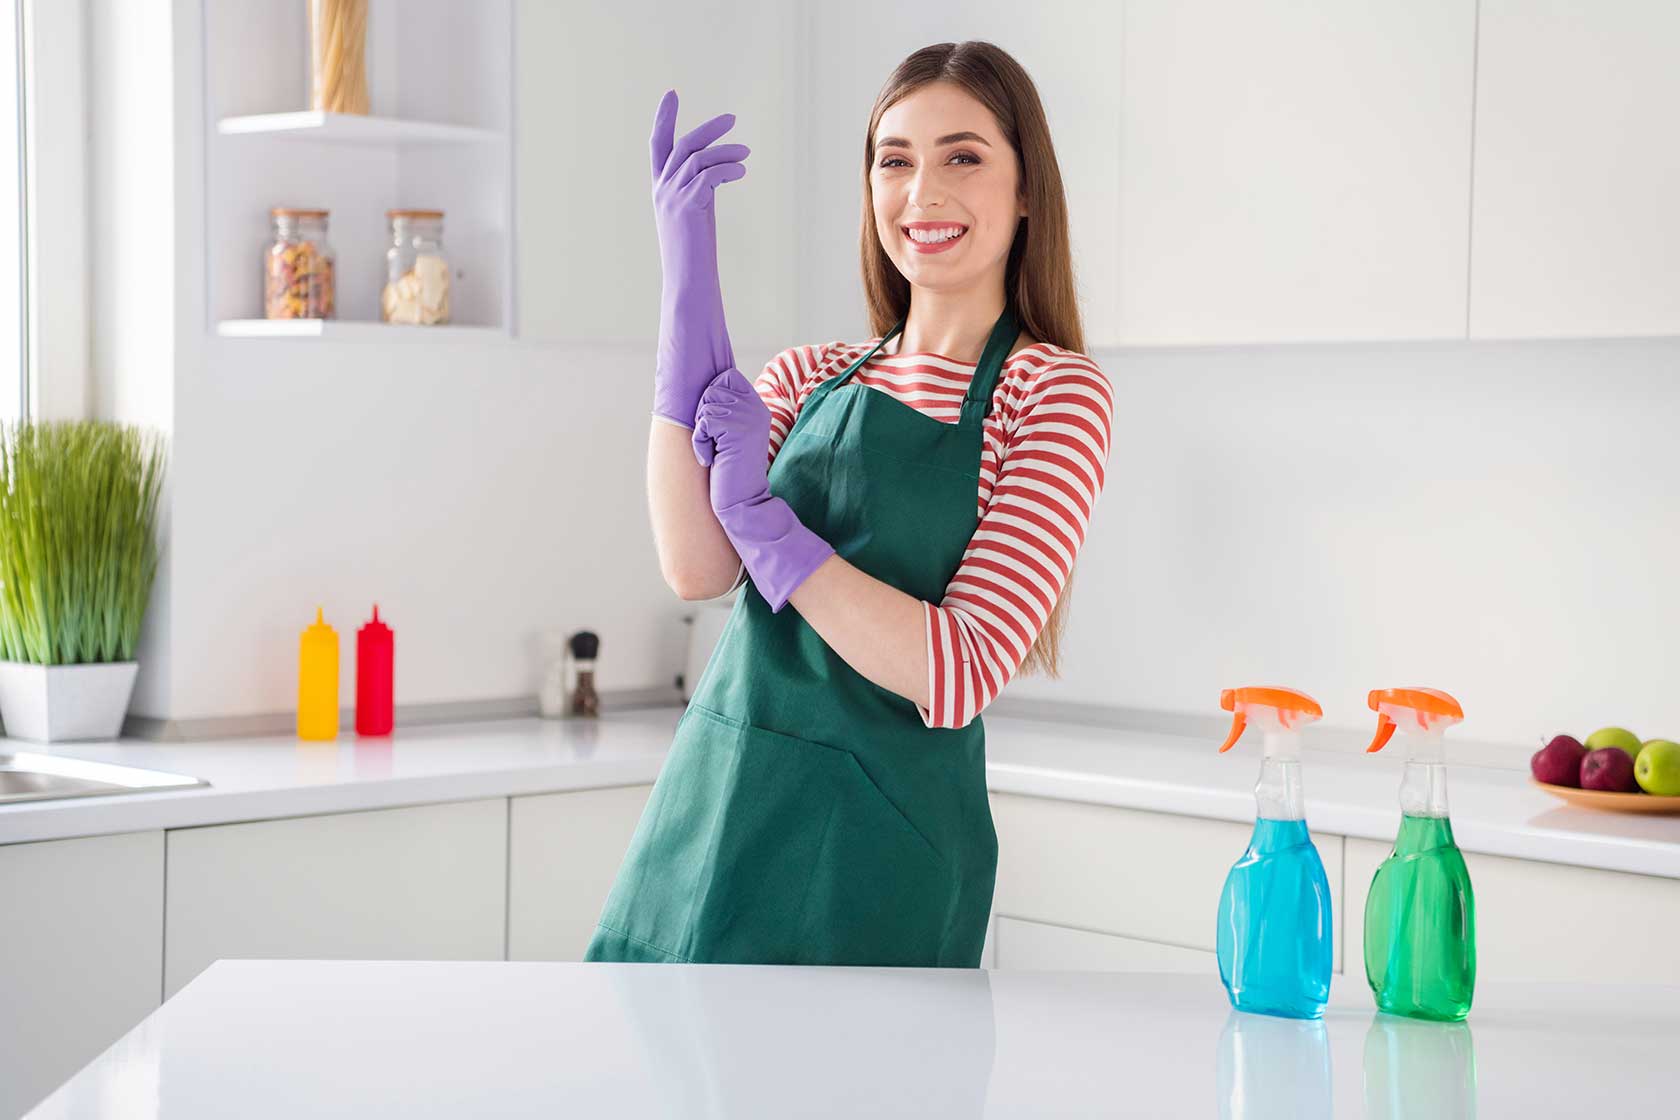 Hiring A Cleaner: 7 Things You Should Know Before You Hire One